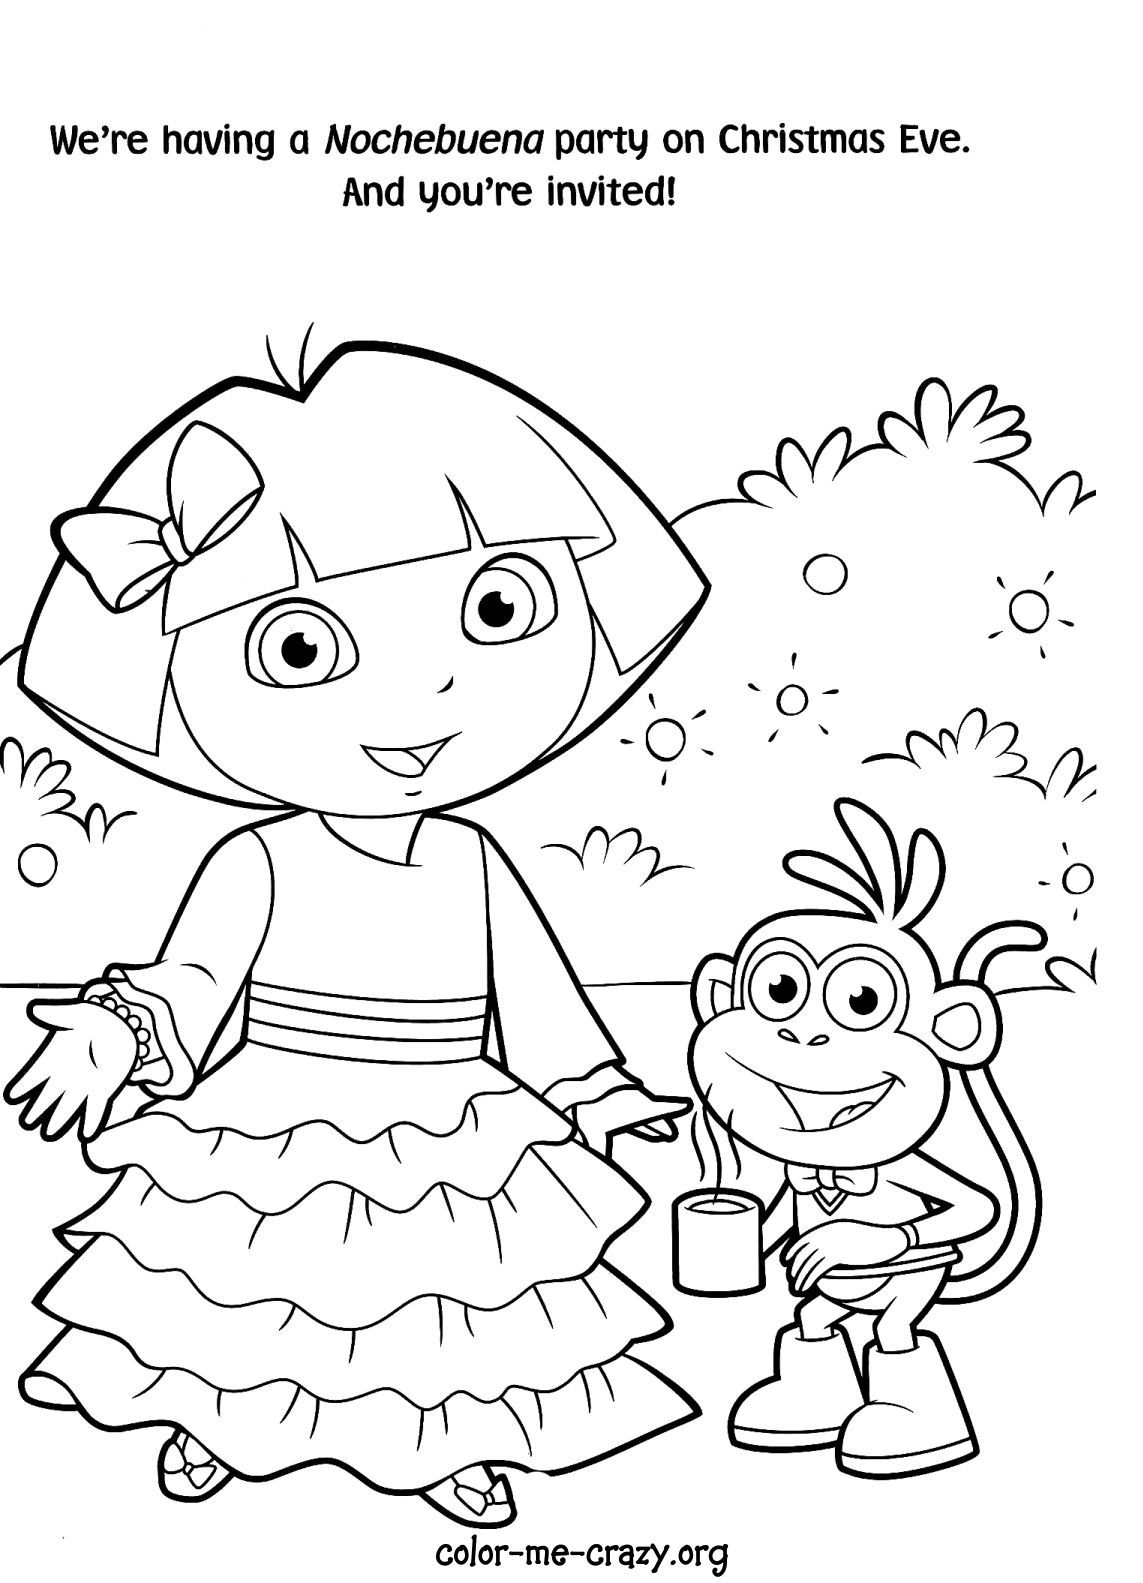 printable dora the explorer coloring pages dora the explorer coloring pages only coloring pages printable coloring the dora pages explorer 